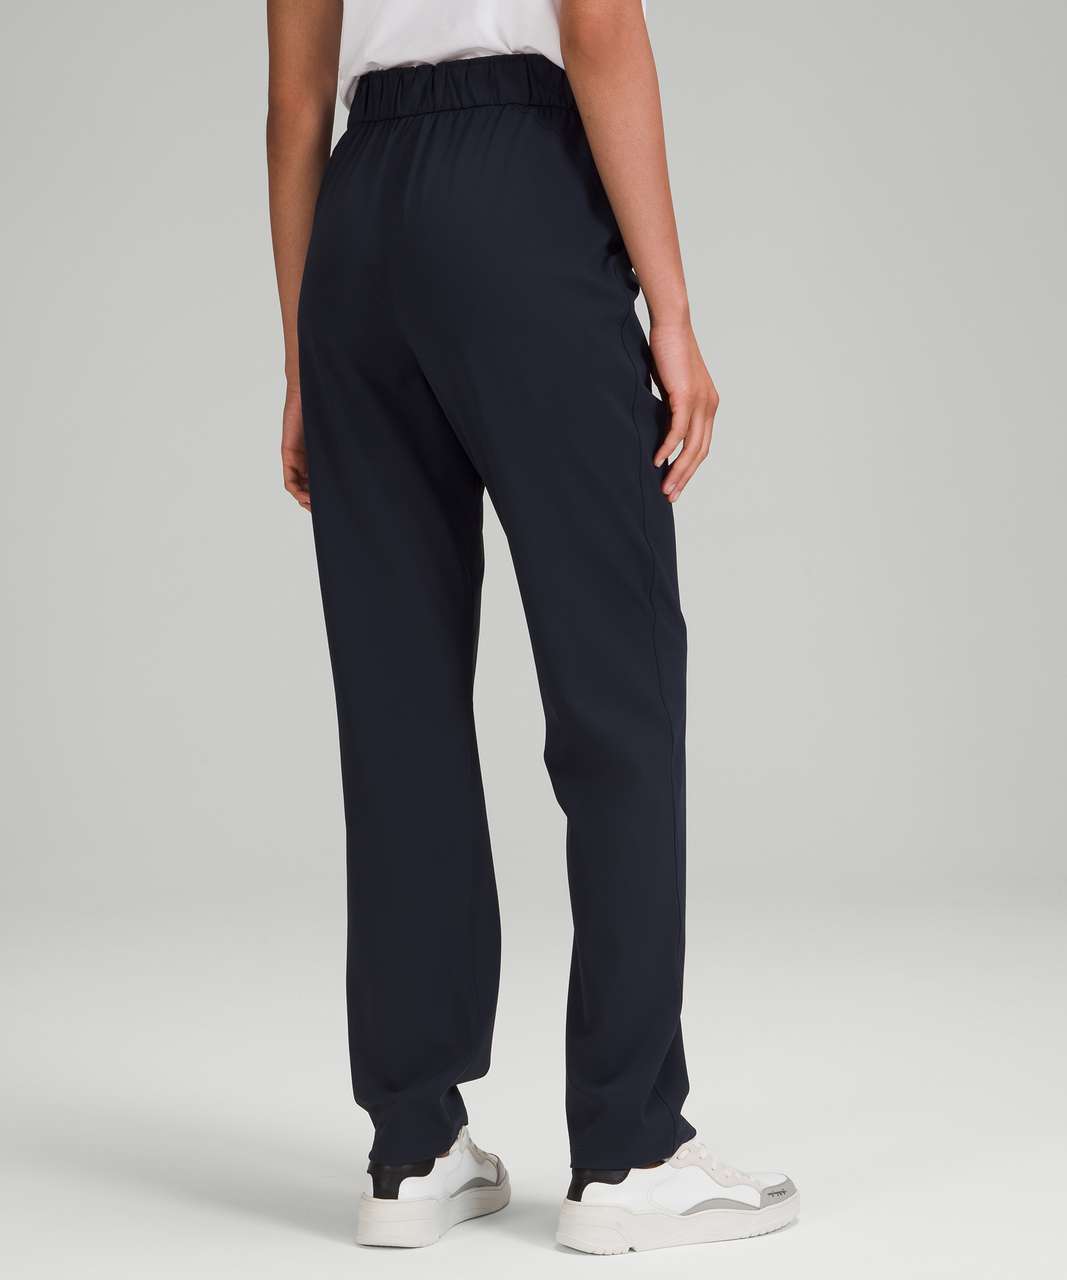 Stretch Luxtreme High-Rise Pant *Full Length